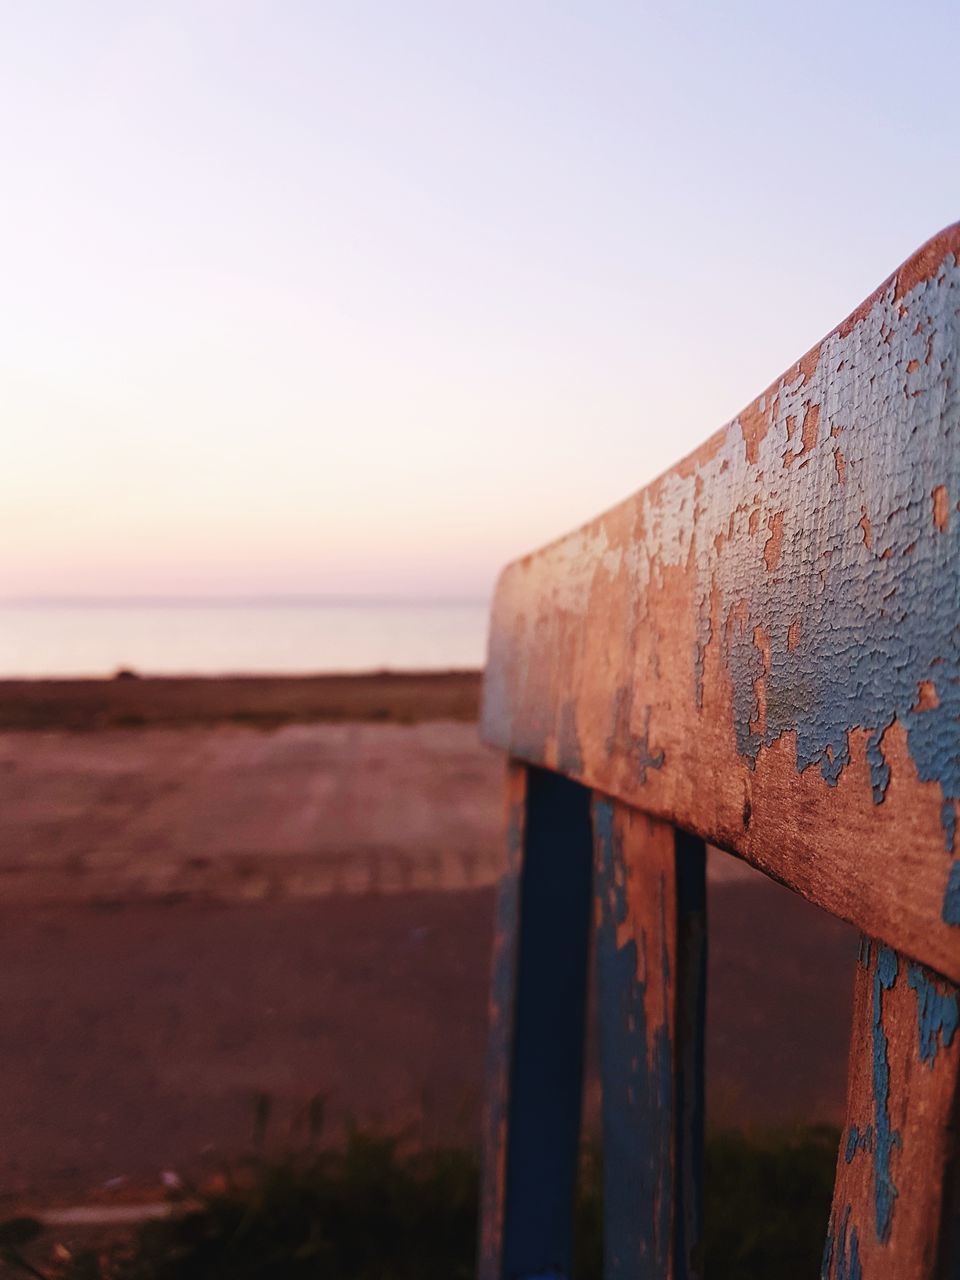 sea, rusty, water, clear sky, metal, no people, outdoors, horizon over water, weathered, nature, day, tranquility, abandoned, scenics, sunset, beach, sky, close-up, built structure, beauty in nature